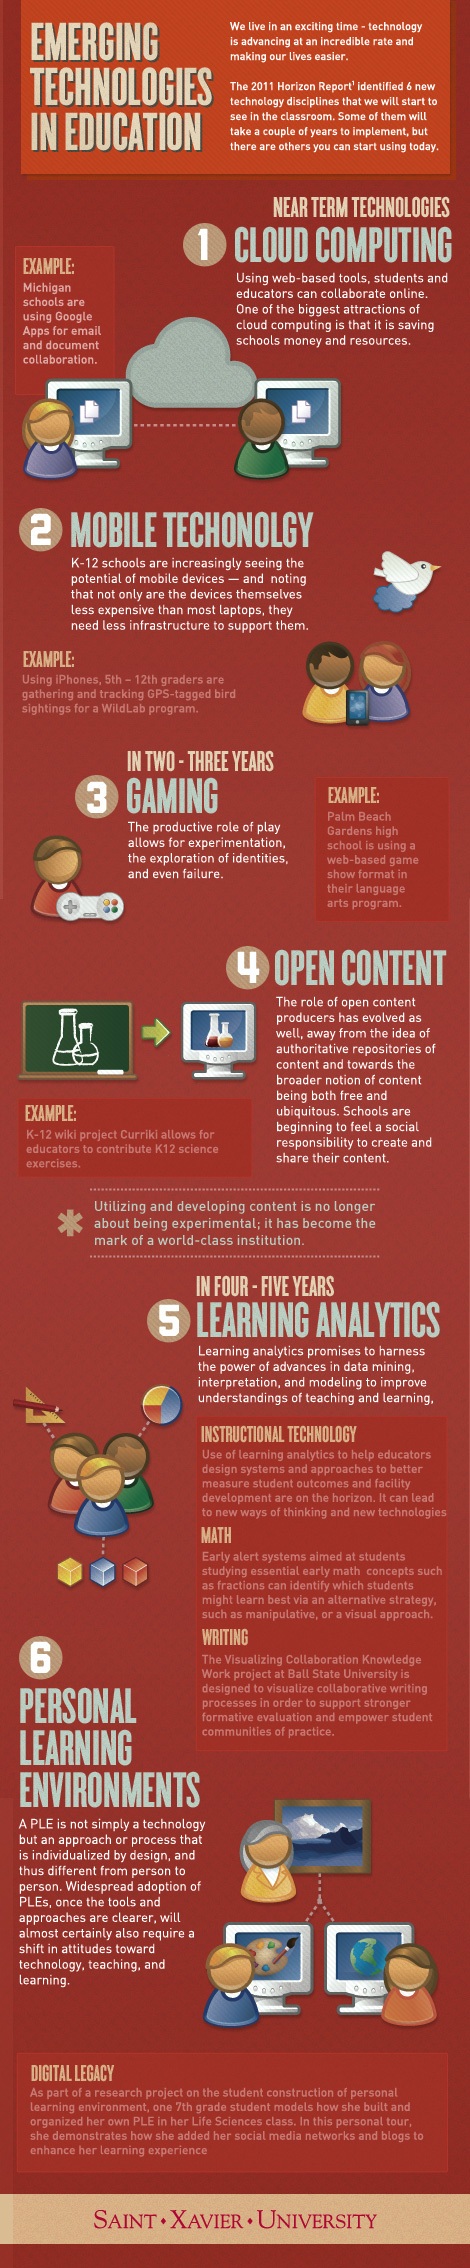 6 Emerging Educational Technologies Infographic